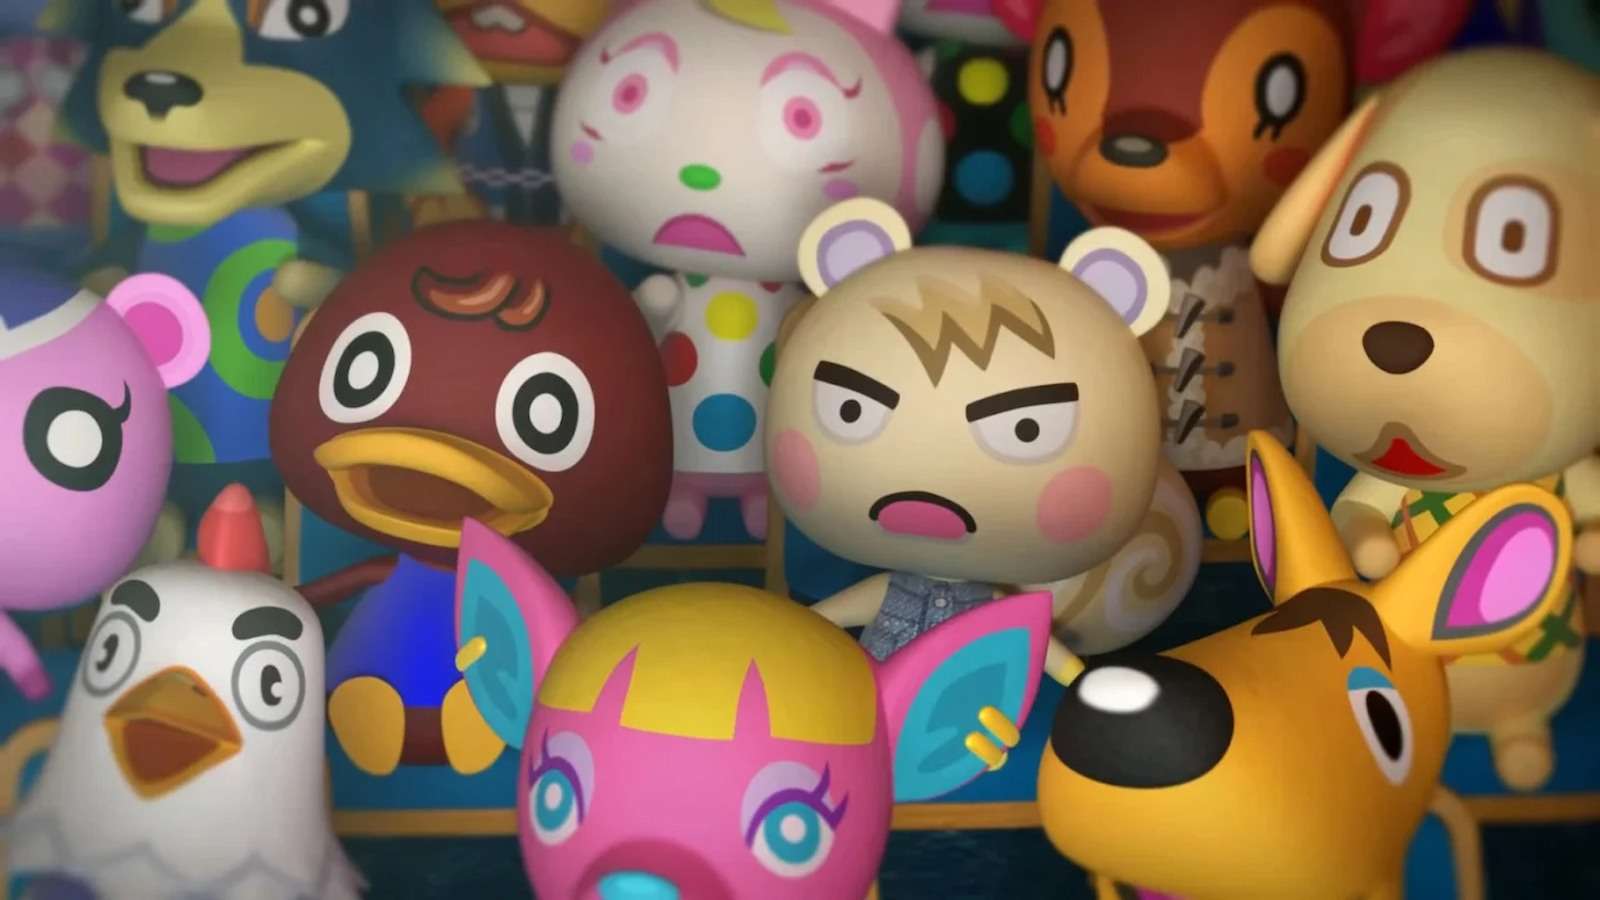 REVIEW: 'Animal Crossing: New Horizons' provides escape